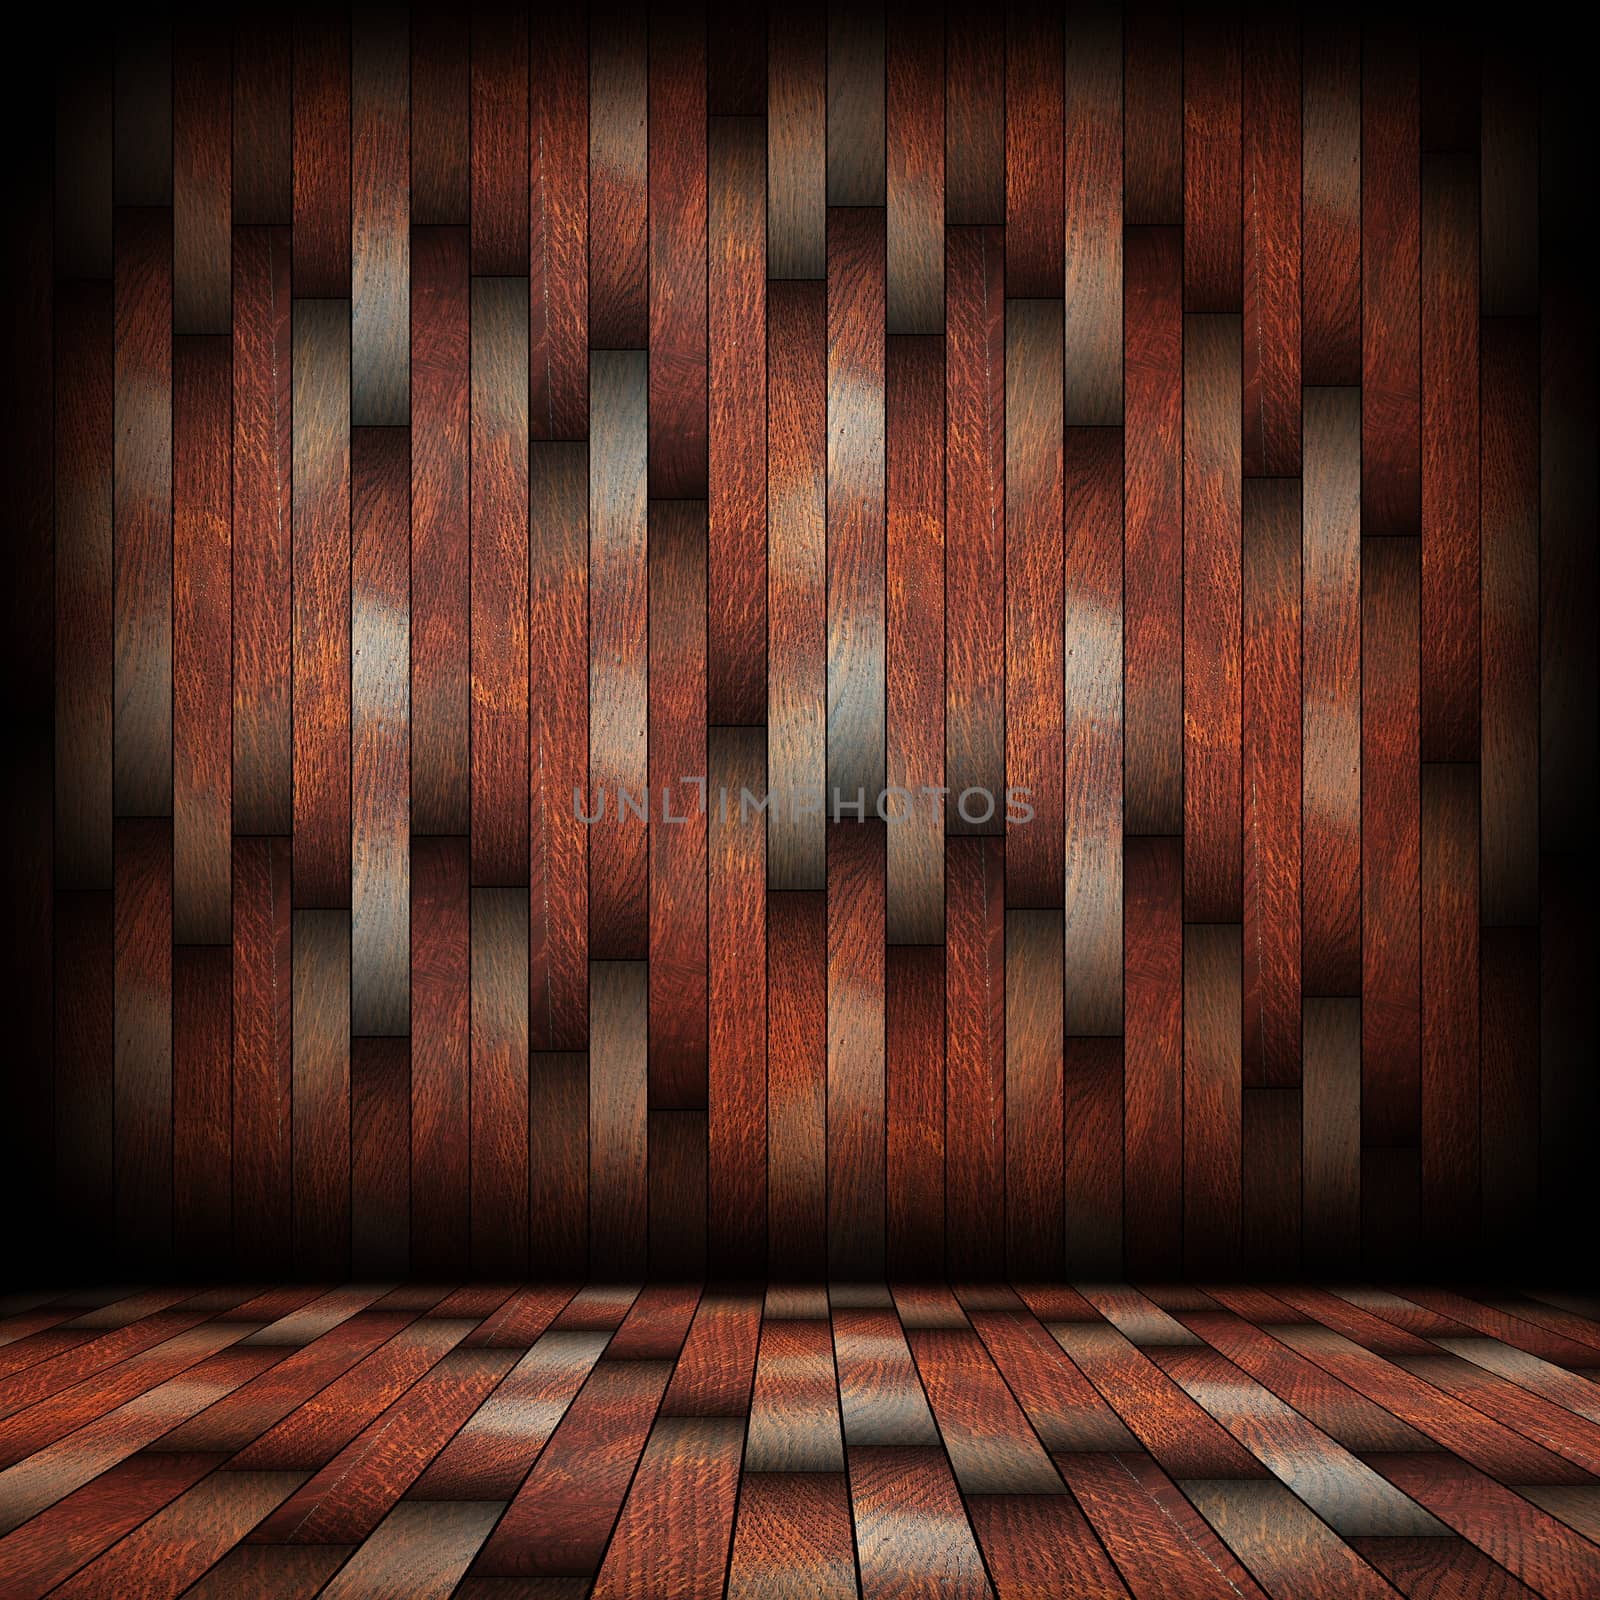 striped pattern of wood planks on wall by taviphoto